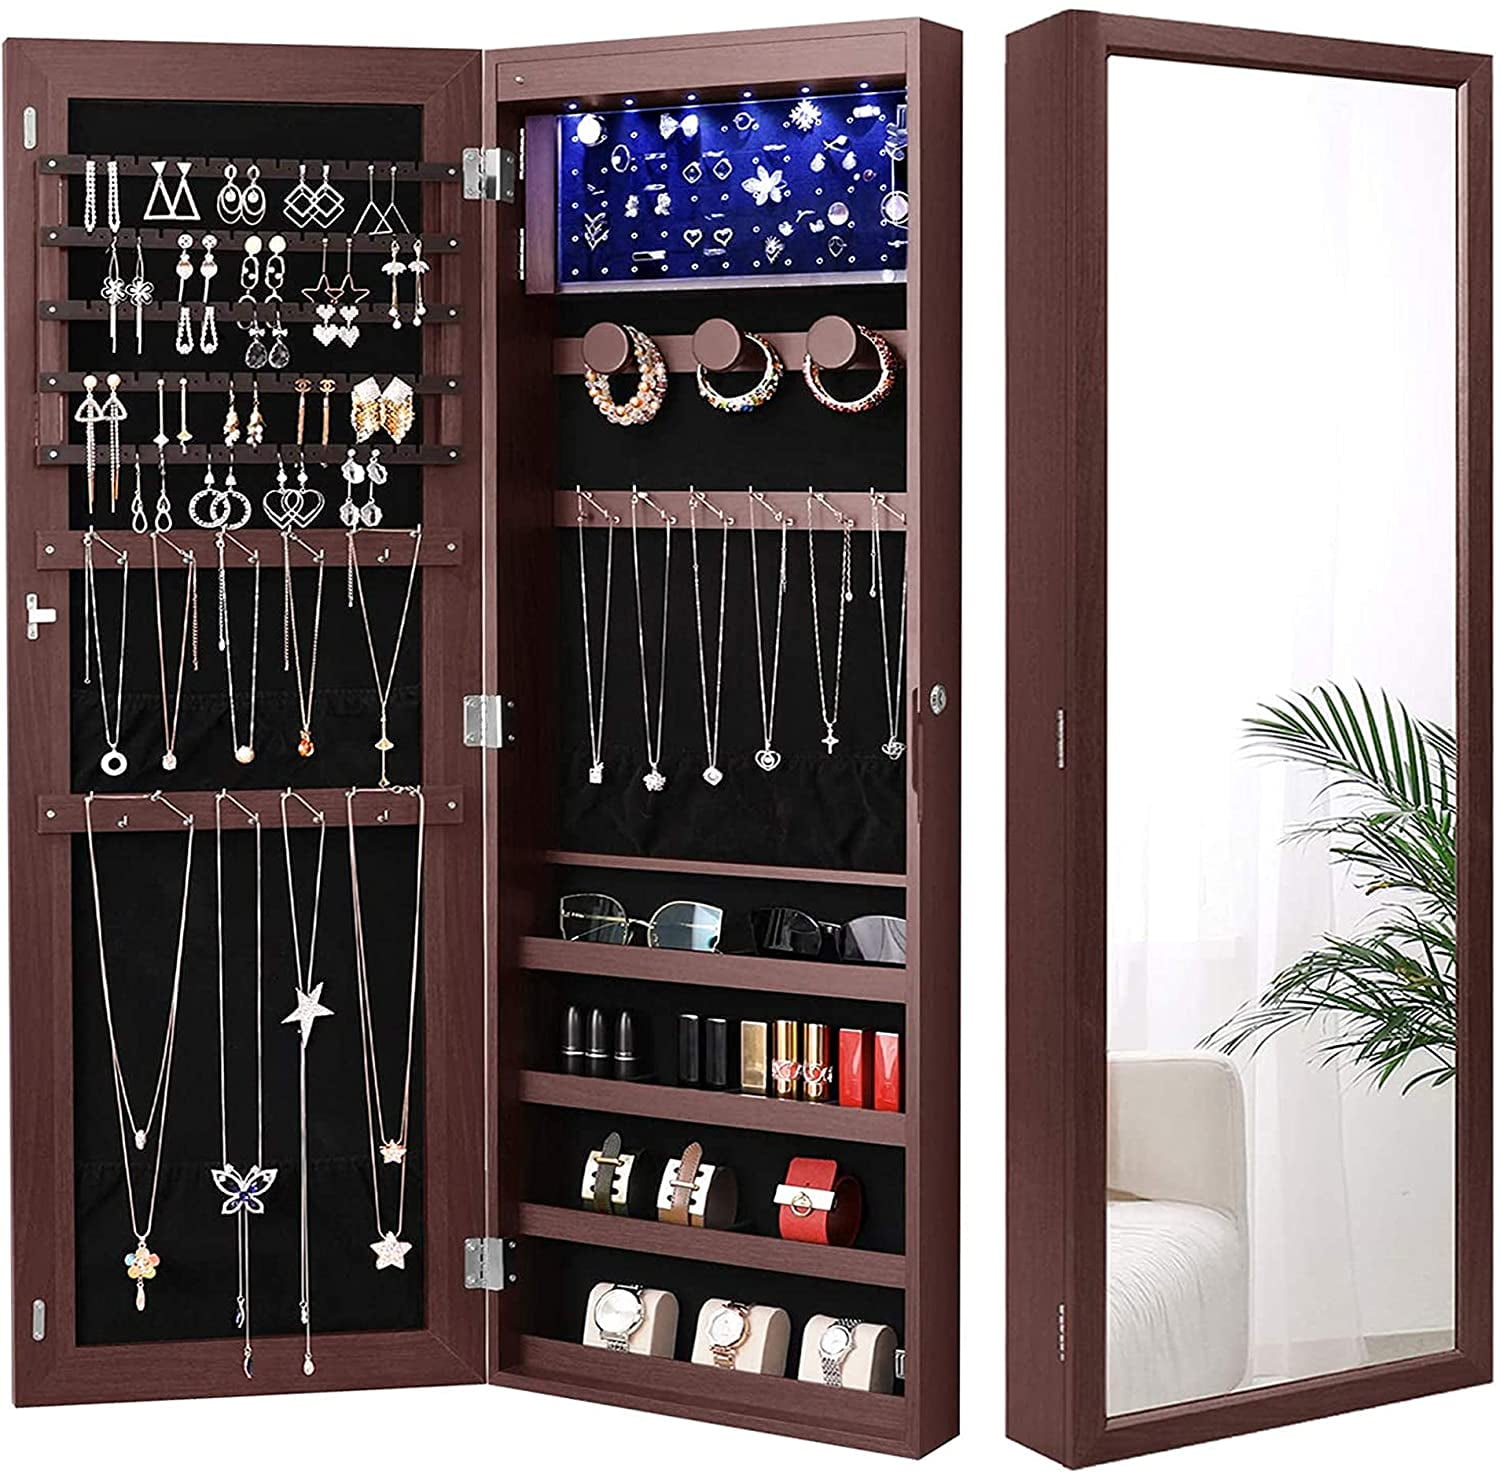 Nicetree 6 LEDs Jewelry Armoire Organizer, Wall/Door Mounted Jewelry